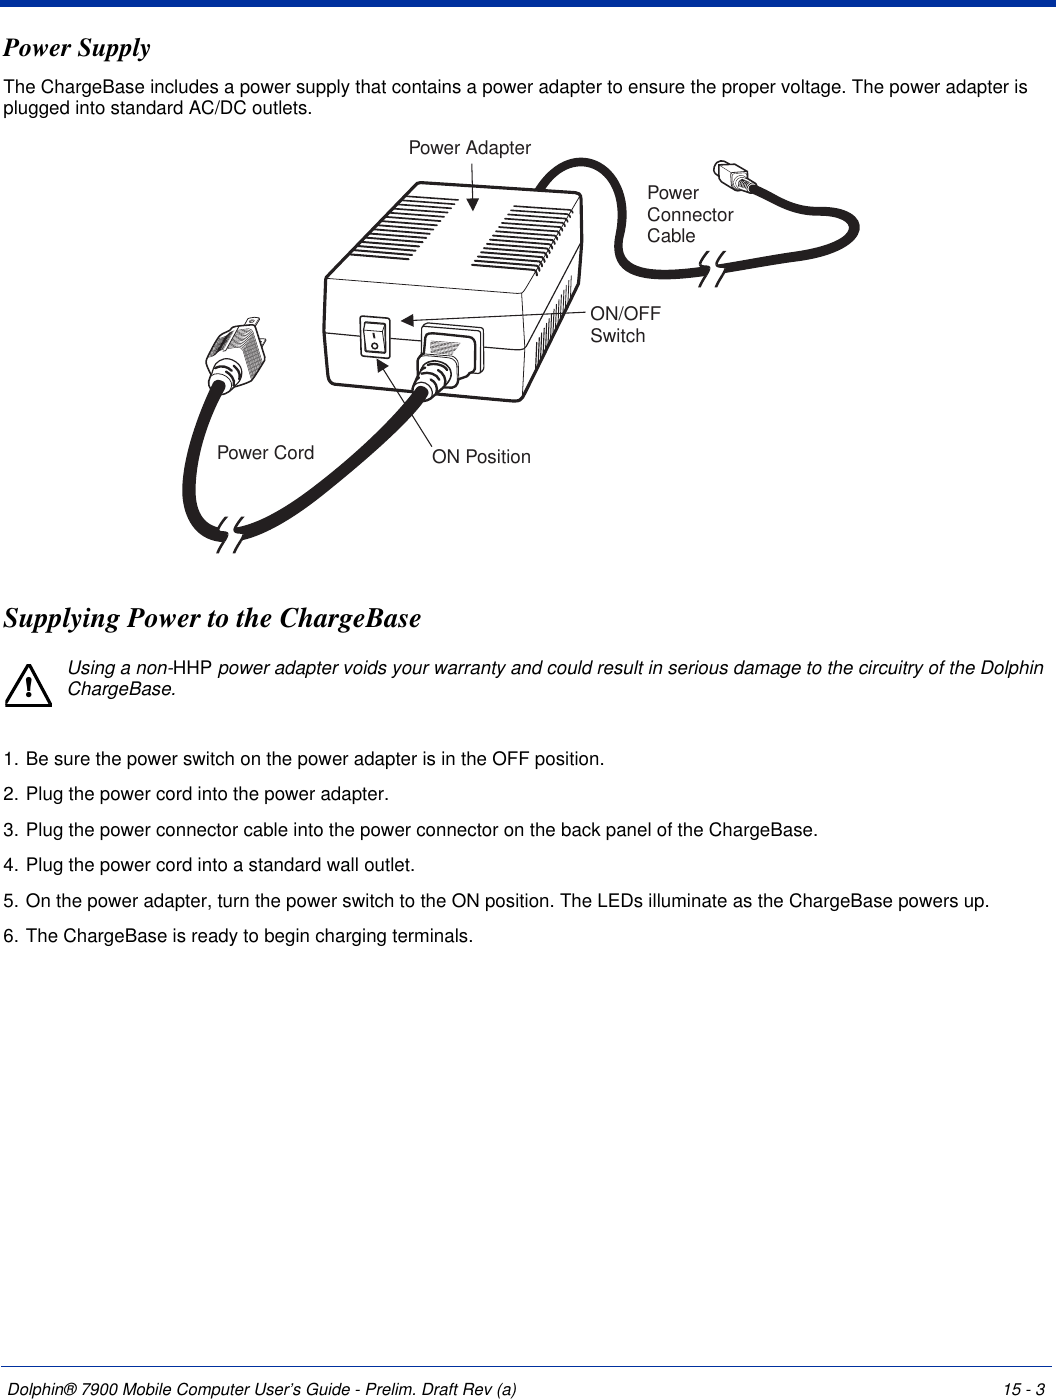 Dolphin® 7900 Mobile Computer User’s Guide - Prelim. Draft Rev (a) 15 - 3Power SupplyThe ChargeBase includes a power supply that contains a power adapter to ensure the proper voltage. The power adapter is plugged into standard AC/DC outlets.Supplying Power to the ChargeBaseUsing a non-HHP power adapter voids your warranty and could result in serious damage to the circuitry of the Dolphin ChargeBase.1. Be sure the power switch on the power adapter is in the OFF position. 2. Plug the power cord into the power adapter.3. Plug the power connector cable into the power connector on the back panel of the ChargeBase.4. Plug the power cord into a standard wall outlet.5. On the power adapter, turn the power switch to the ON position. The LEDs illuminate as the ChargeBase powers up.6. The ChargeBase is ready to begin charging terminals.Power CordON/OFFSwitchON PositionPower AdapterPowerConnectorCable!